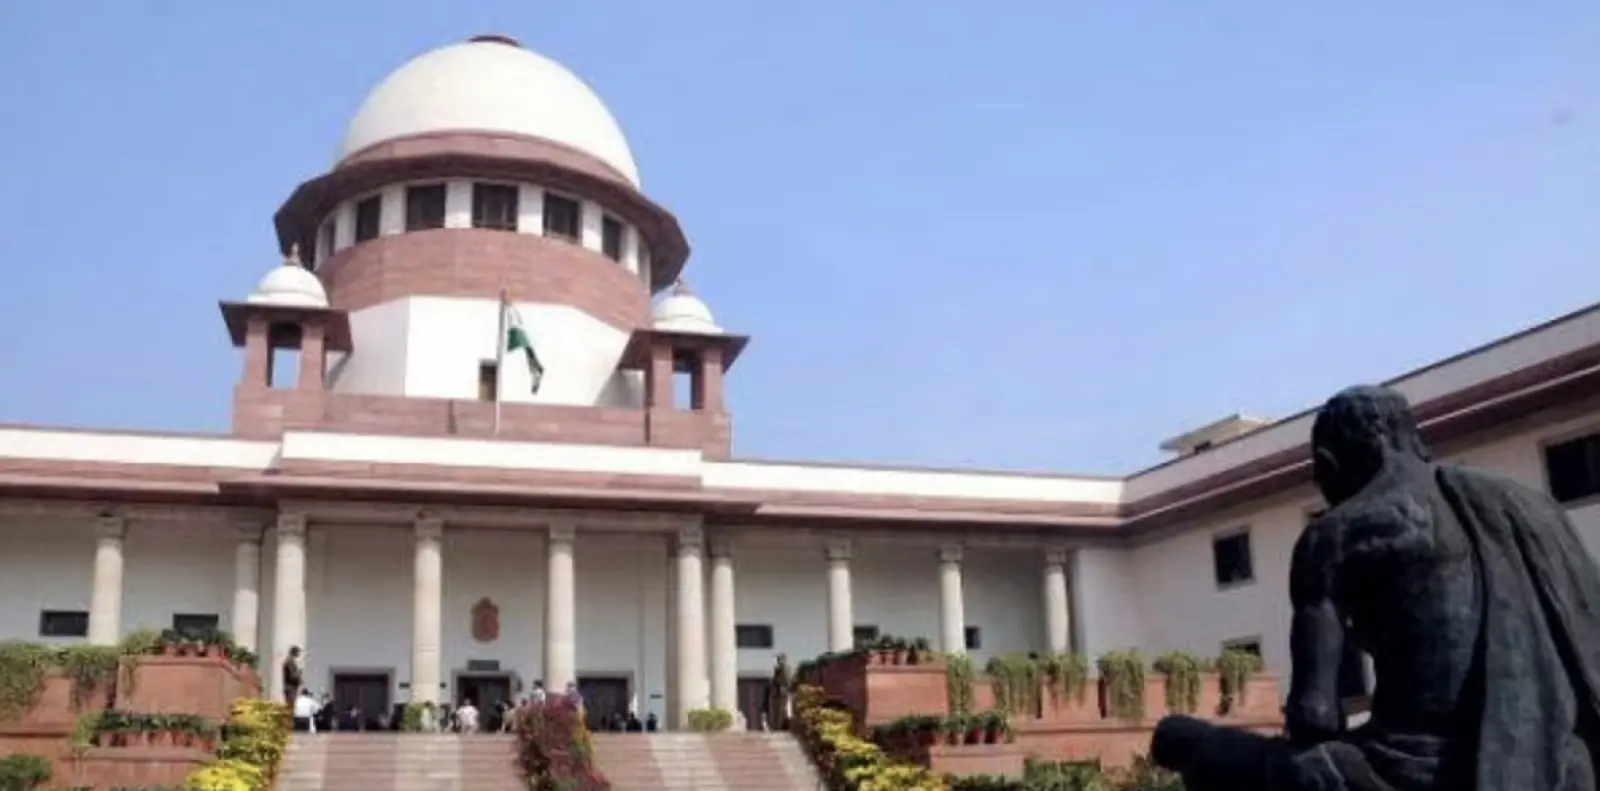 'The provision of arbitration will be effective even in agreements without stamp', the decision of the seven-member bench of the Supreme Court